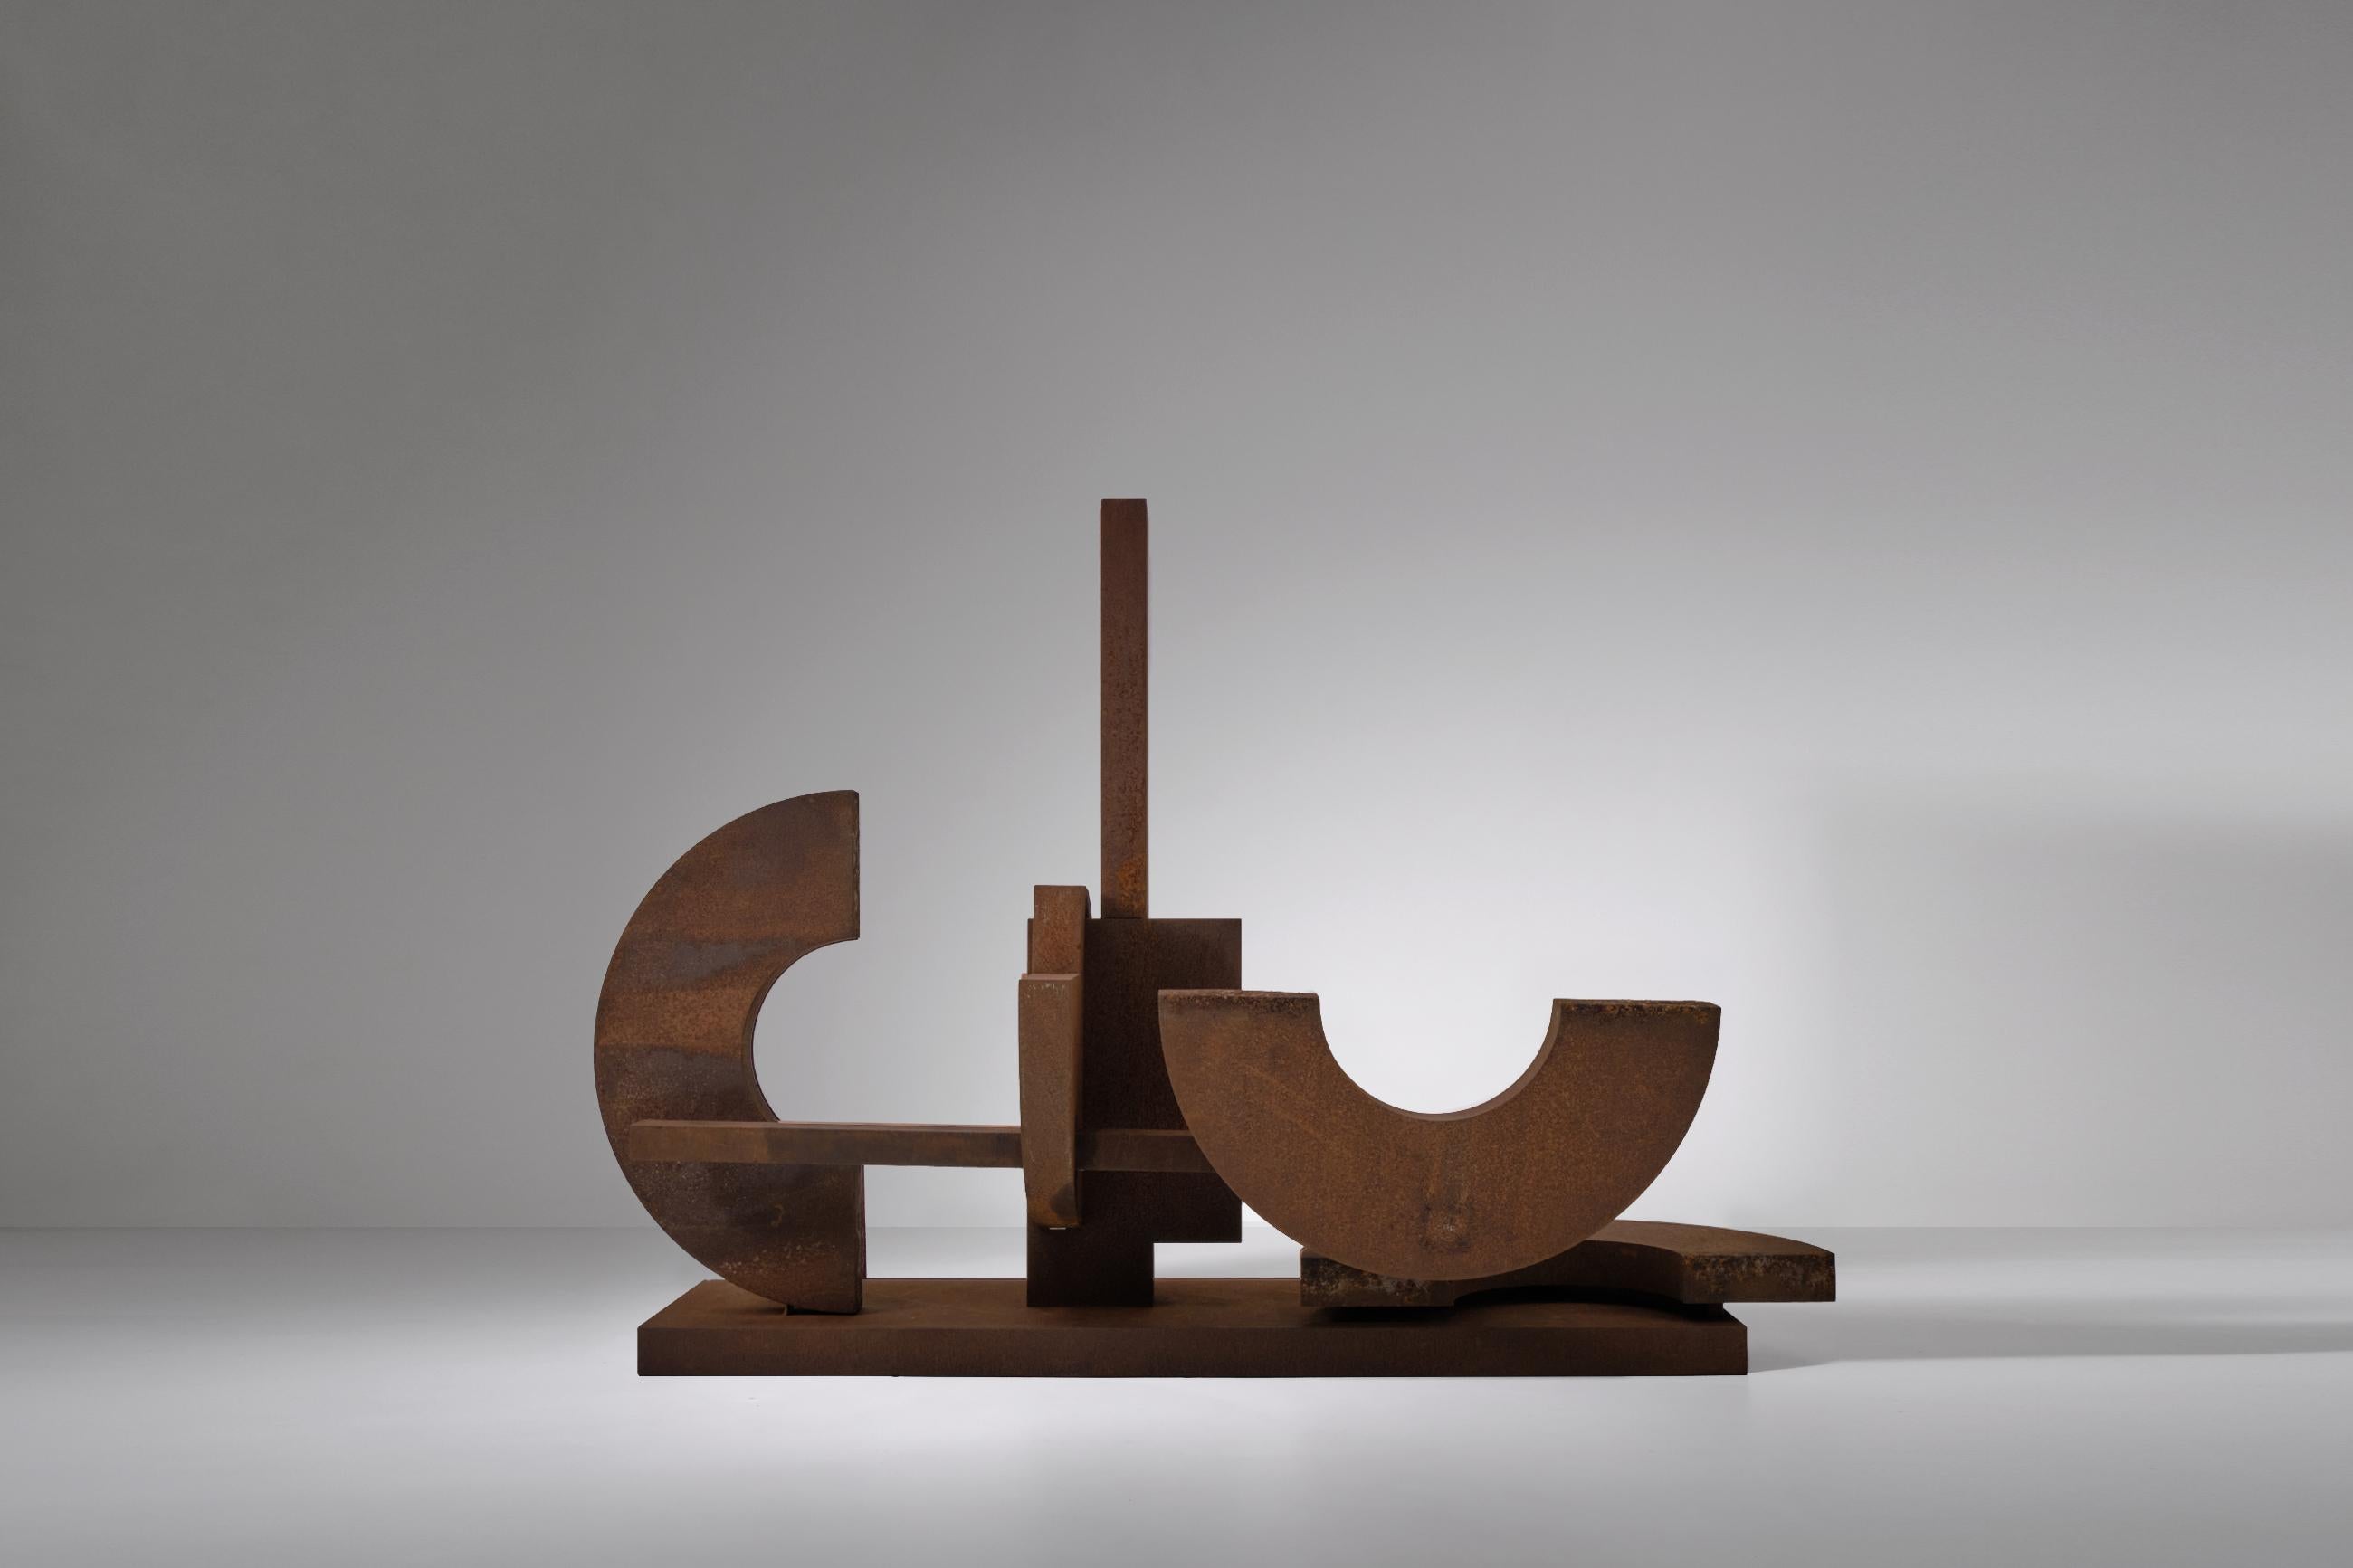 Large abstract geometric corten steel sculpture, 1970s. The sculpture is composed of different geometric forms made out of corten steel and has a very strong architectonic appearance. The surface of the sculpture shows a beautiful oxidation which